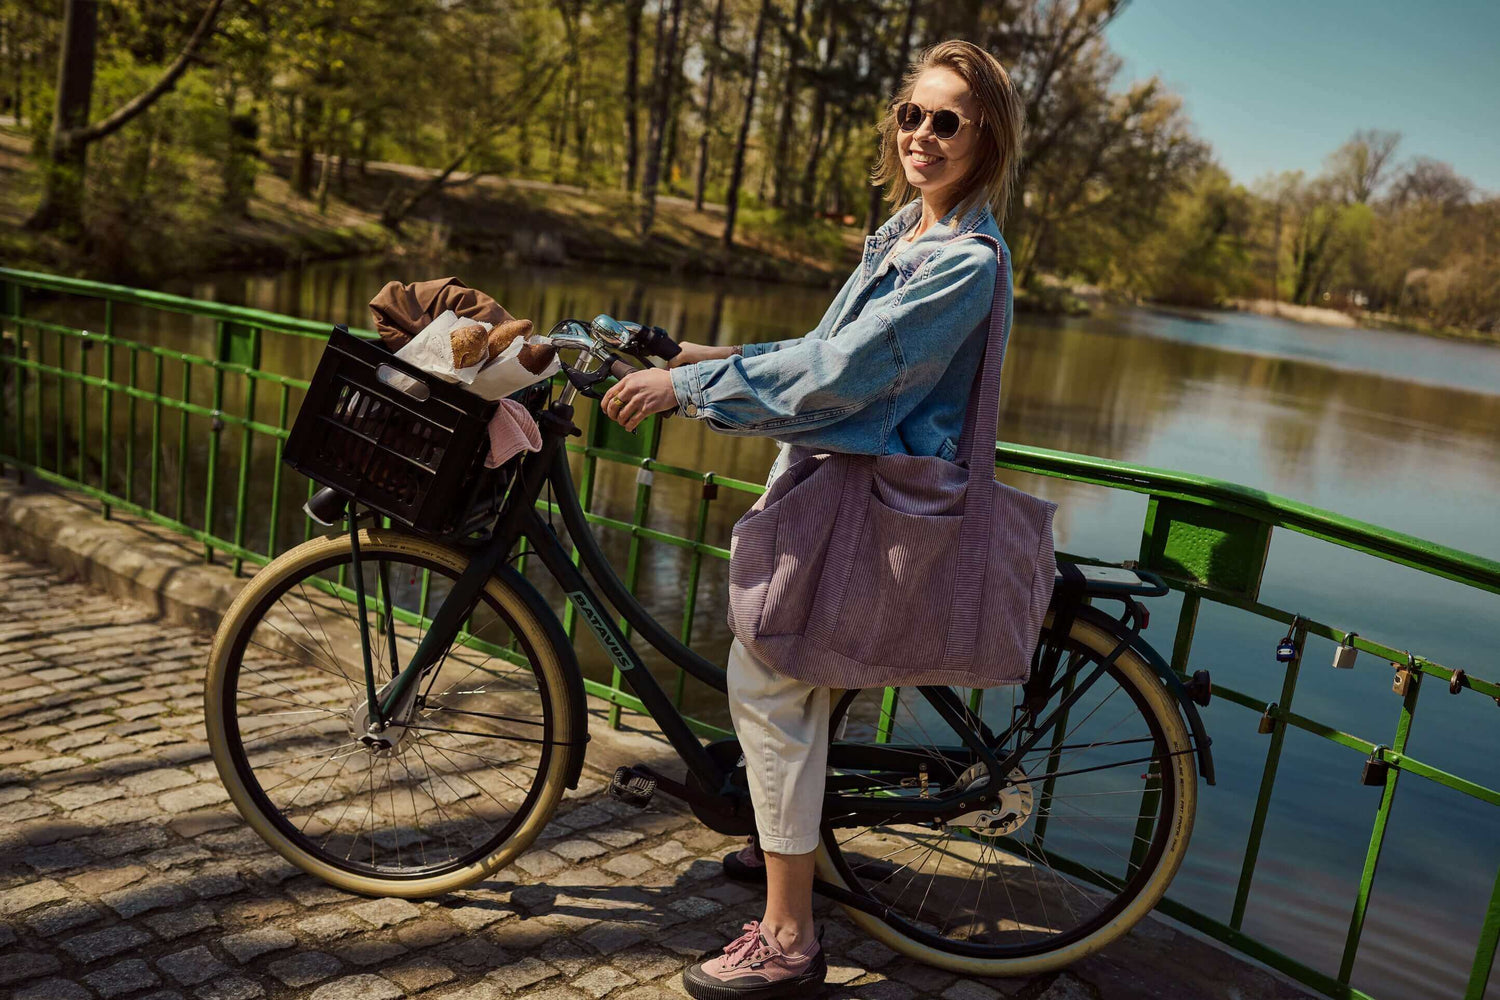 Bettys Home lavender shopper bag. Young woman during her free time on bike with lavender mom bag by Bettys home